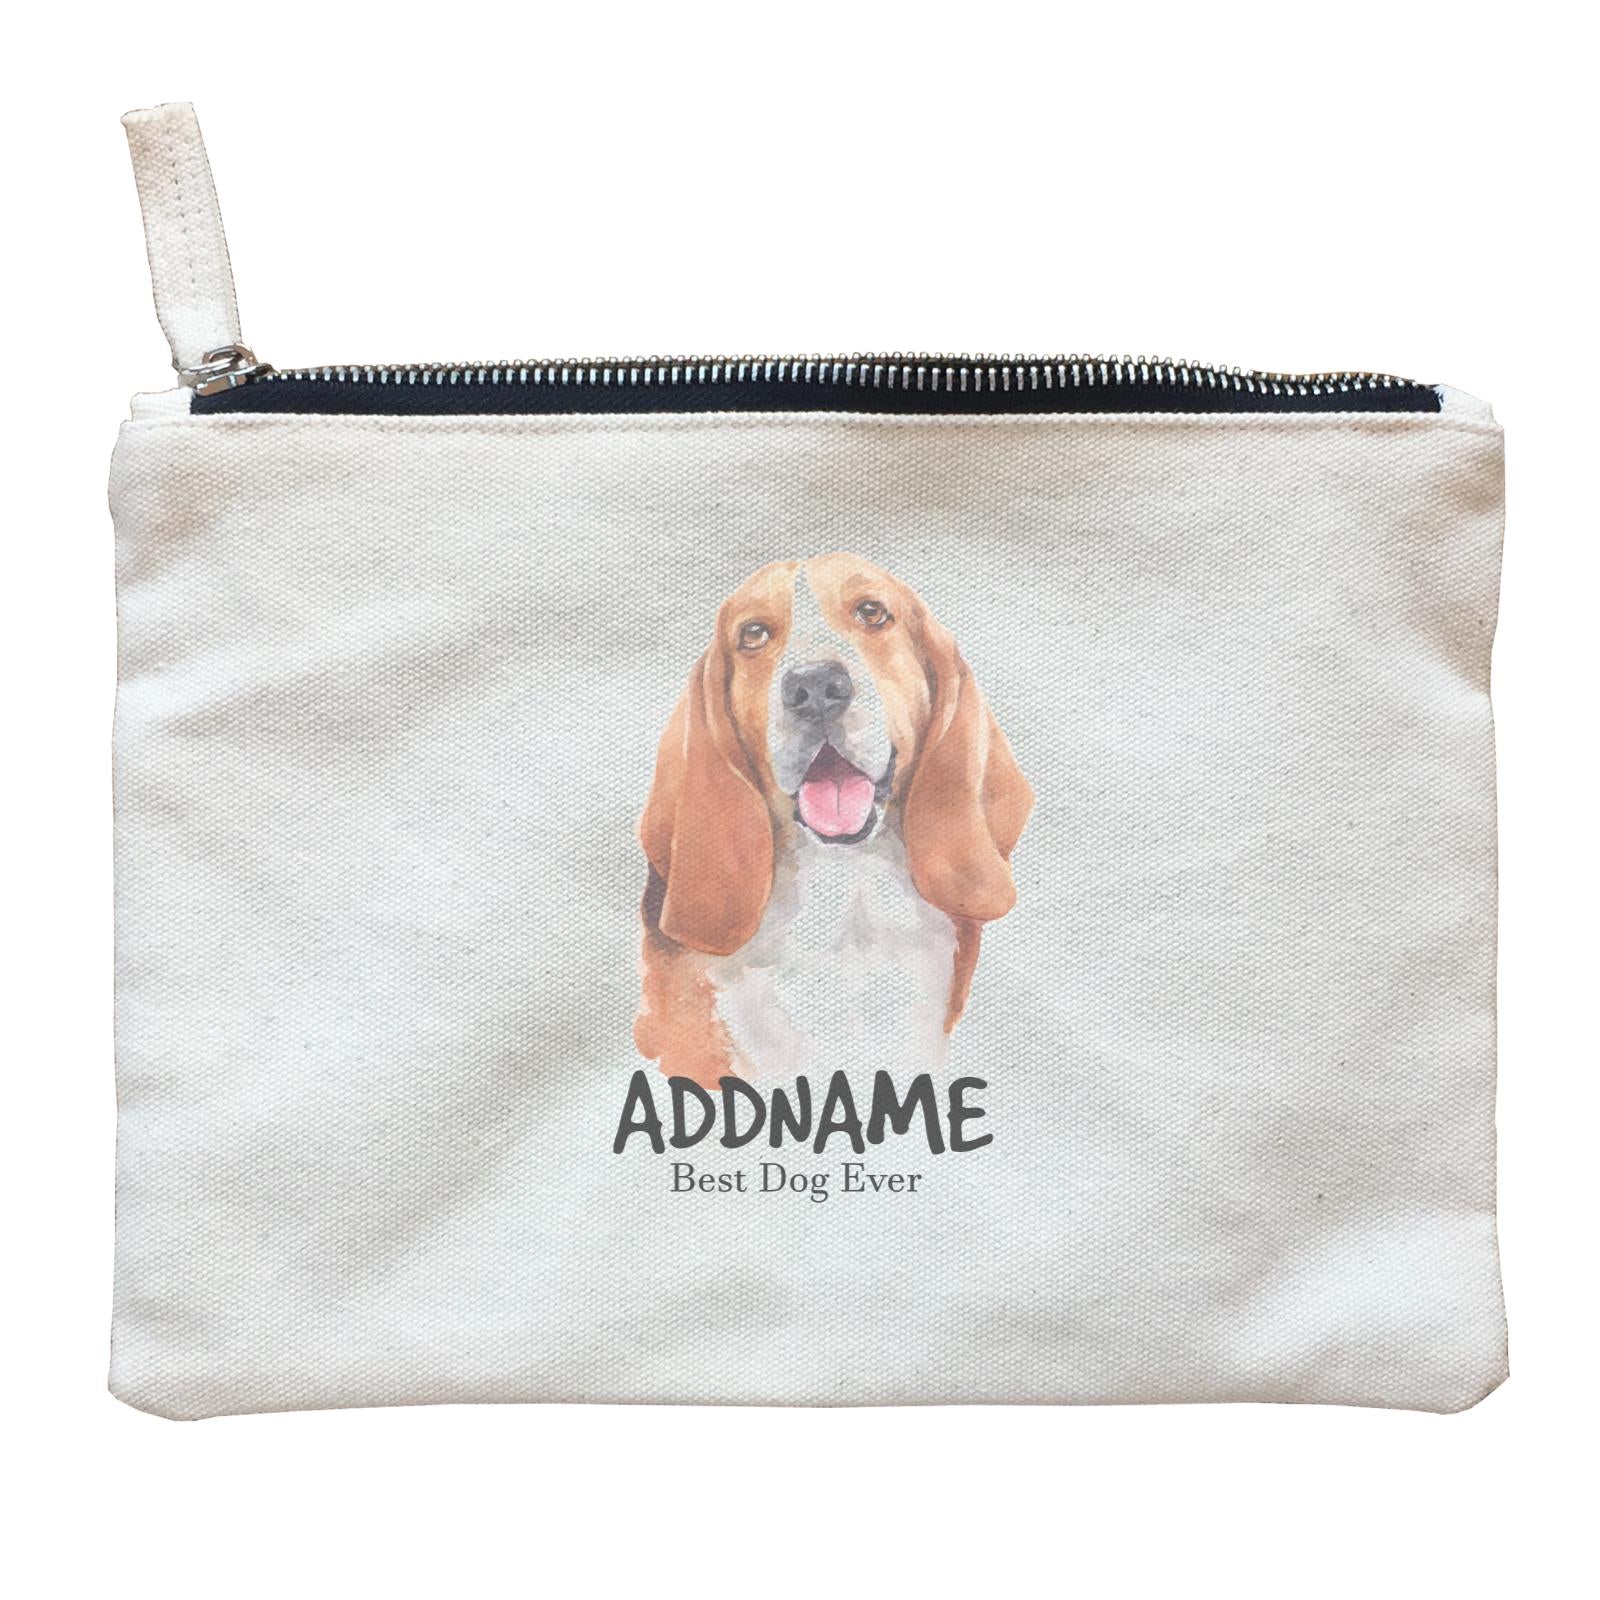 Watercolor Dog Basset Hound Happy Best Dog Ever Addname Zipper Pouch